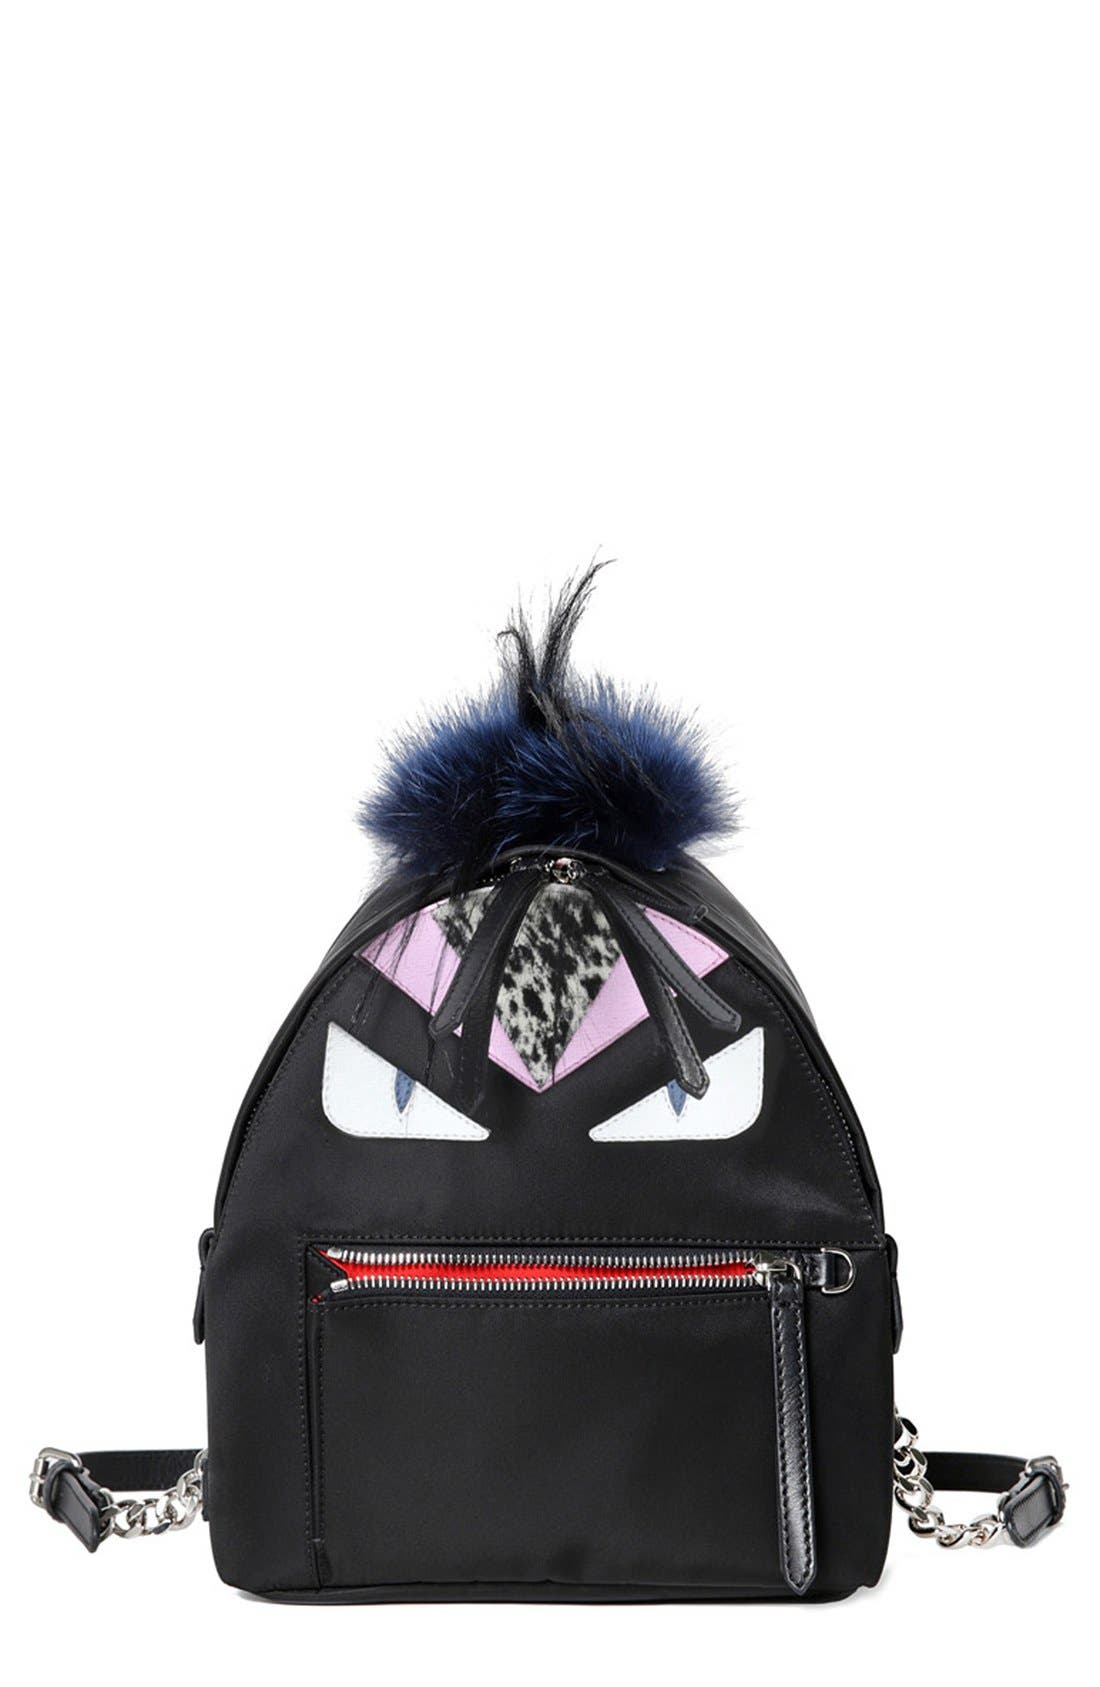 backpack with monster face